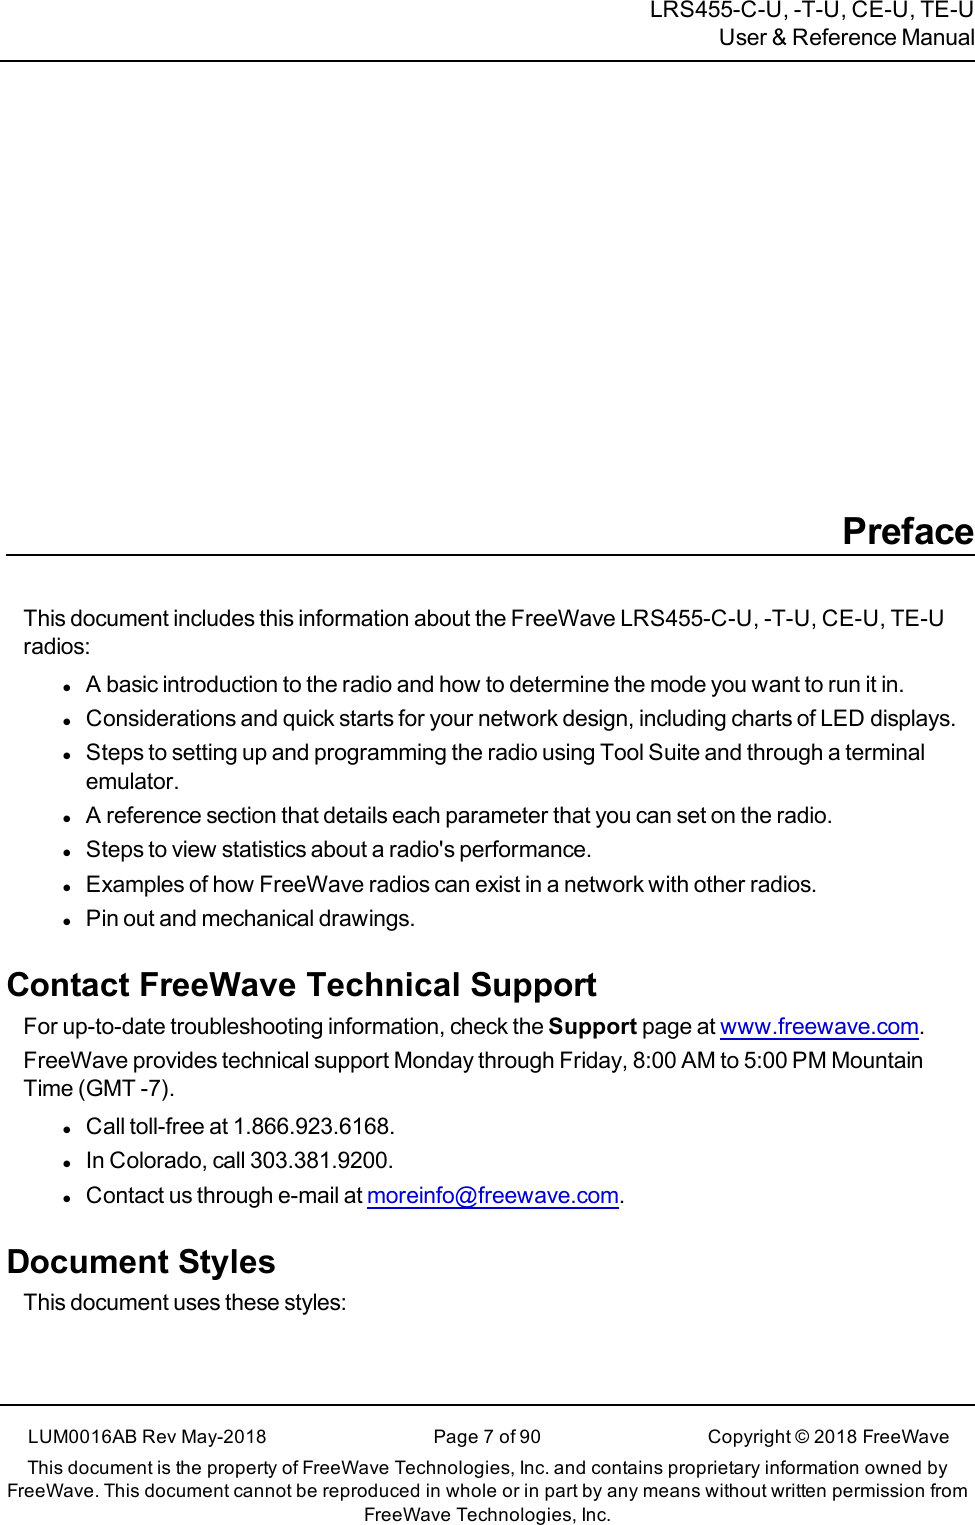 LRS455-C-U, -T-U, CE-U, TE-UUser &amp; Reference ManualPrefaceThis document includes this information about the FreeWave LRS455-C-U, -T-U, CE-U, TE-Uradios:lA basic introduction to the radio and how to determine the mode you want to run it in.lConsiderations and quick starts for your network design, including charts of LED displays.lSteps to setting up and programming the radio using Tool Suite and through a terminalemulator.lA reference section that details each parameter that you can set on the radio.lSteps to view statistics about a radio&apos;s performance.lExamples of how FreeWave radios can exist in a network with other radios.lPin out and mechanical drawings.Contact FreeWave Technical SupportFor up-to-date troubleshooting information, check the Support page at www.freewave.com.FreeWave provides technical support Monday through Friday, 8:00 AM to 5:00 PM MountainTime (GMT -7).lCall toll-free at 1.866.923.6168.lIn Colorado, call 303.381.9200.lContact us through e-mail at moreinfo@freewave.com.Document StylesThis document uses these styles:LUM0016AB Rev May-2018 Page 7 of 90 Copyright © 2018FreeWaveThis document is the property of FreeWave Technologies, Inc. and contains proprietary information owned byFreeWave. This document cannot be reproduced in whole or in part by any means without written permission fromFreeWave Technologies, Inc.